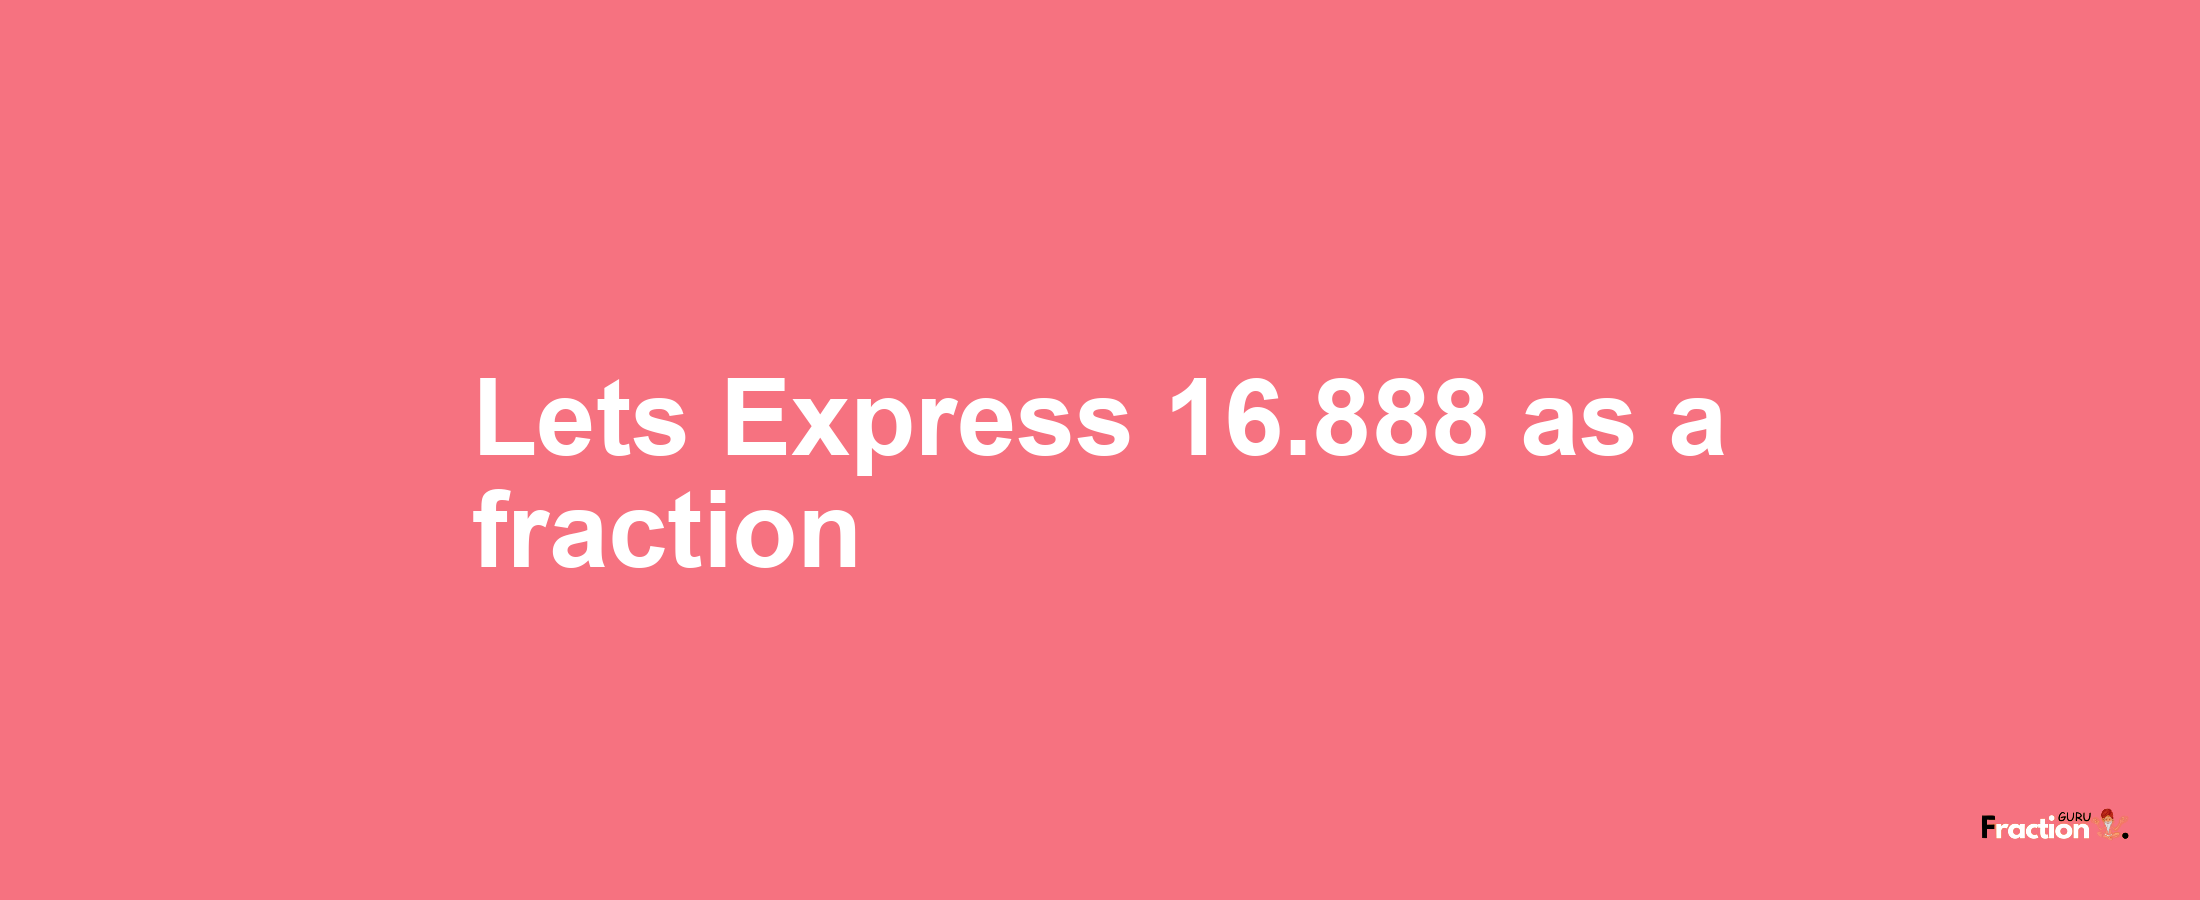 Lets Express 16.888 as afraction